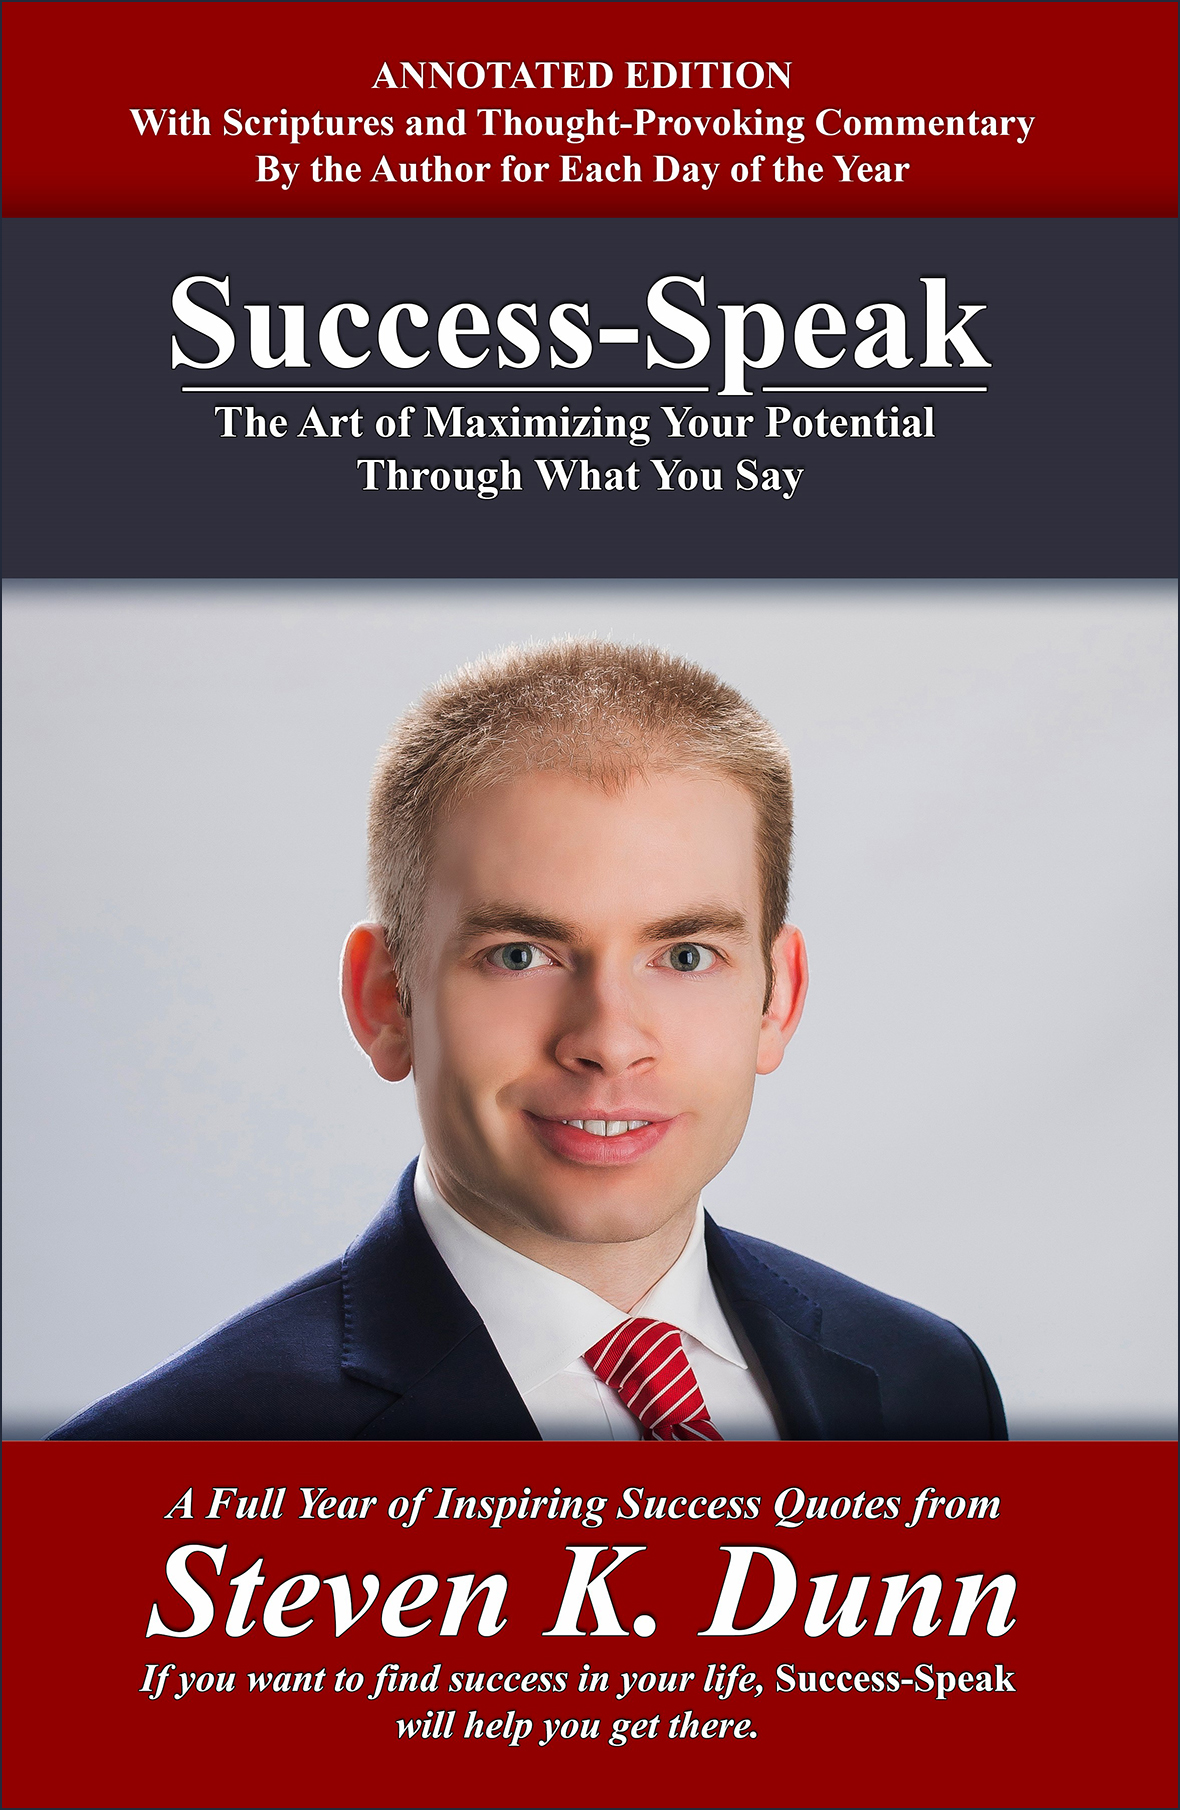 Success Speak Cover Annotated V14 Cropped to Front3